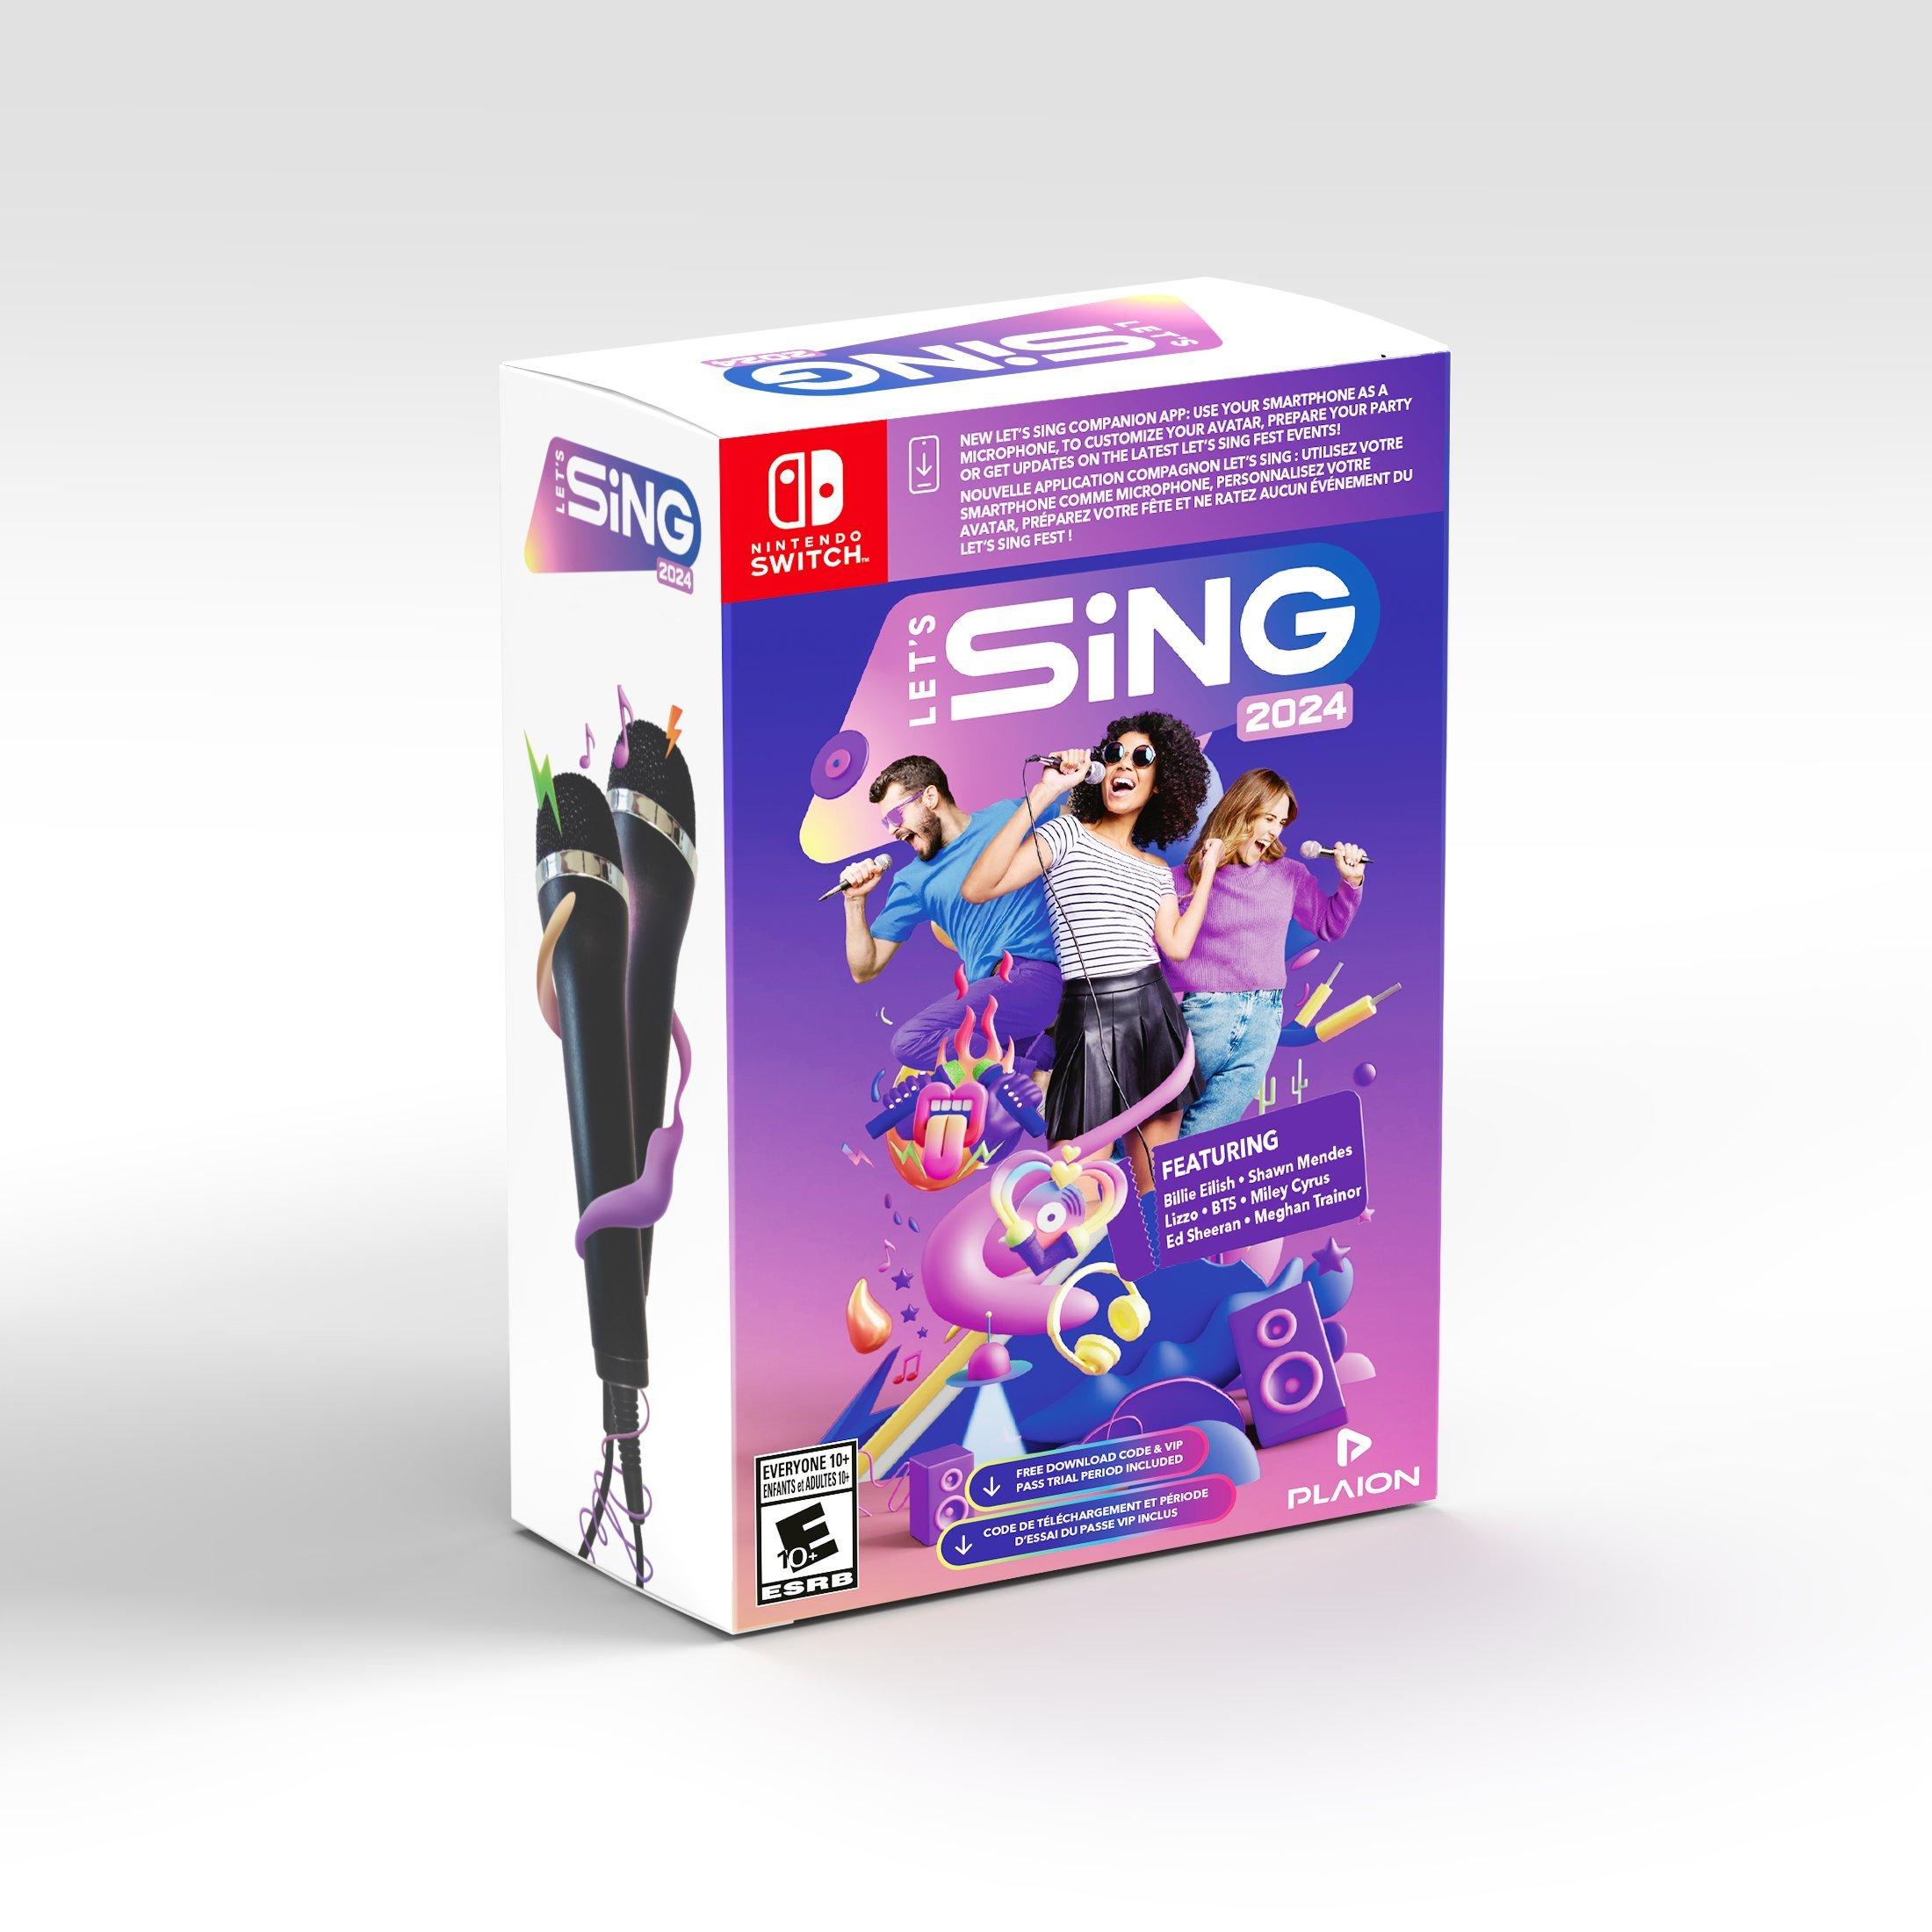 Lets Sing 2024 Switch